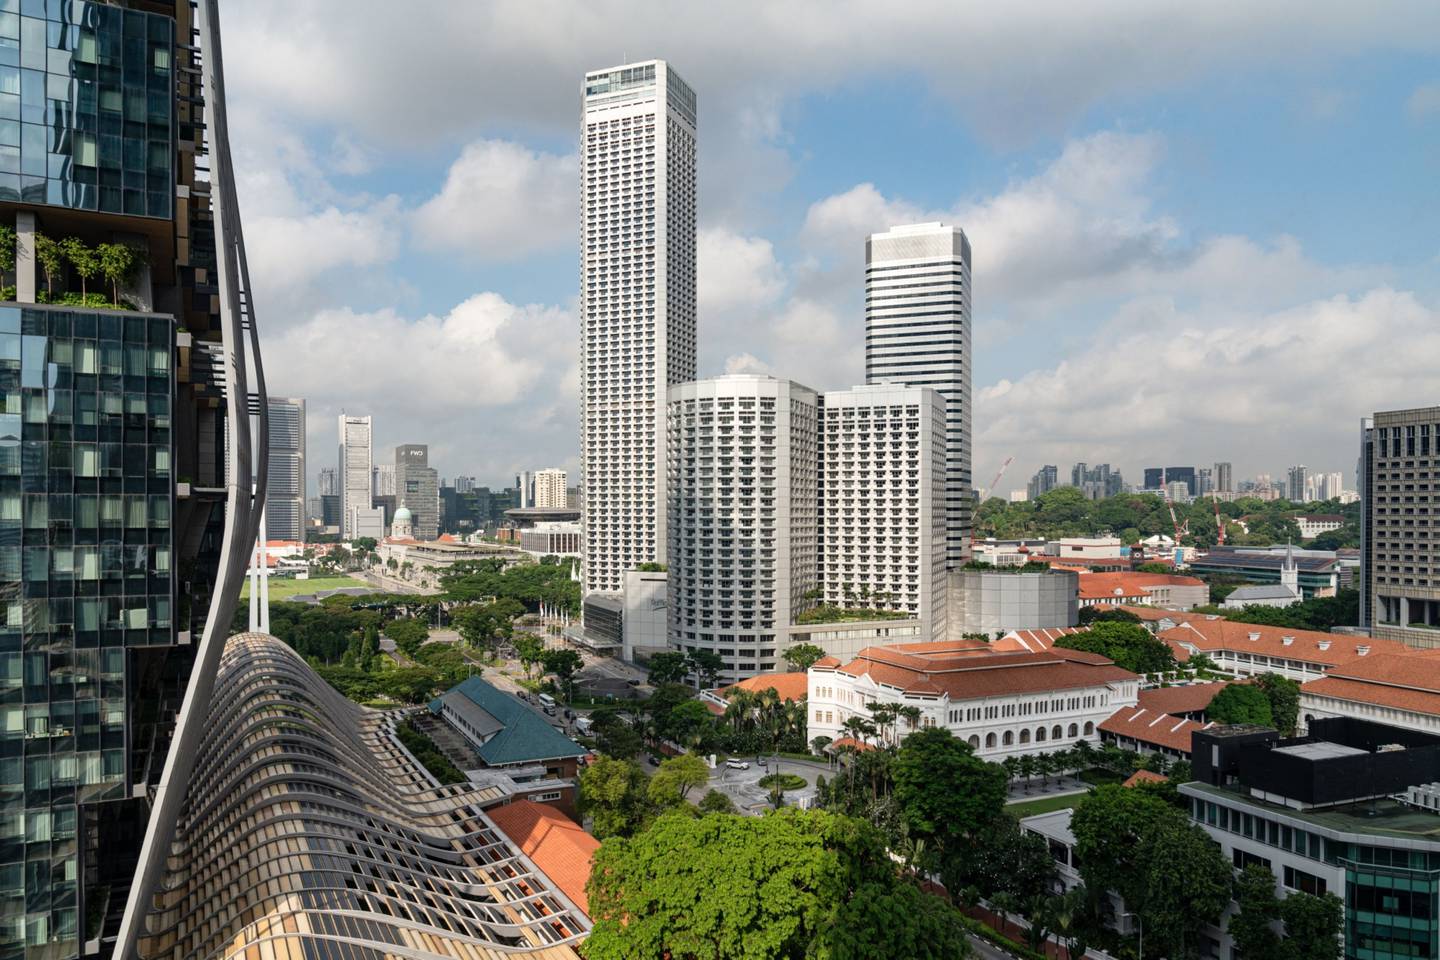 The Green Buildings in Singapore keep tropical tenants cool.